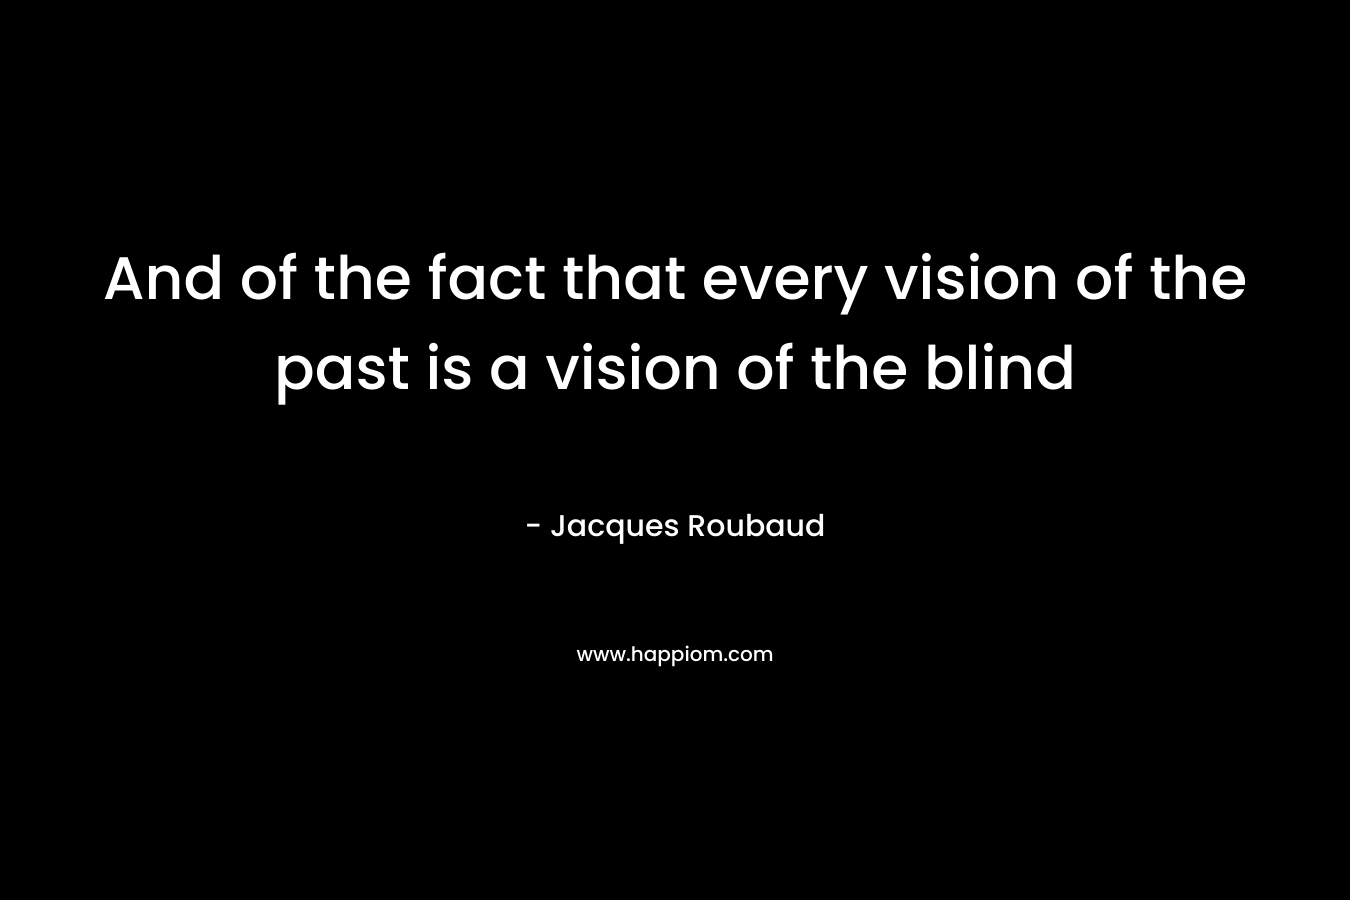 And of the fact that every vision of the past is a vision of the blind